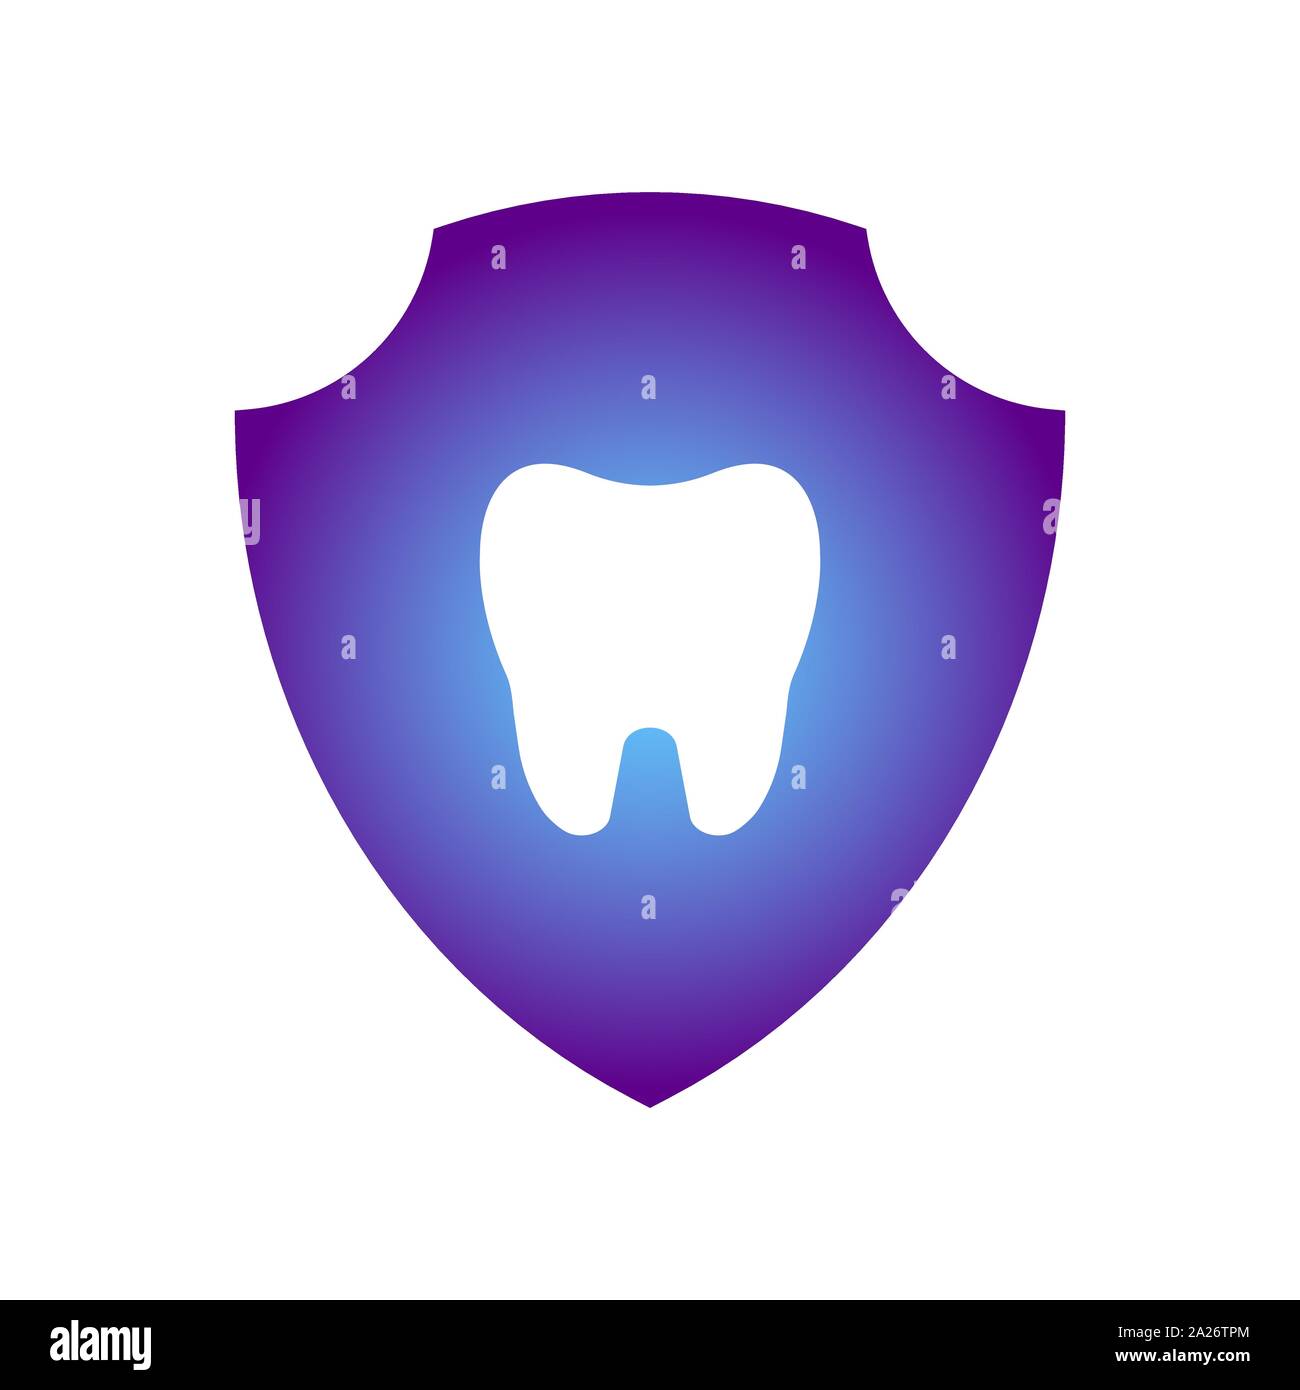 Glowing tooth image inside a purple shield. Tooth protection idea. EPS 10 Stock Vector